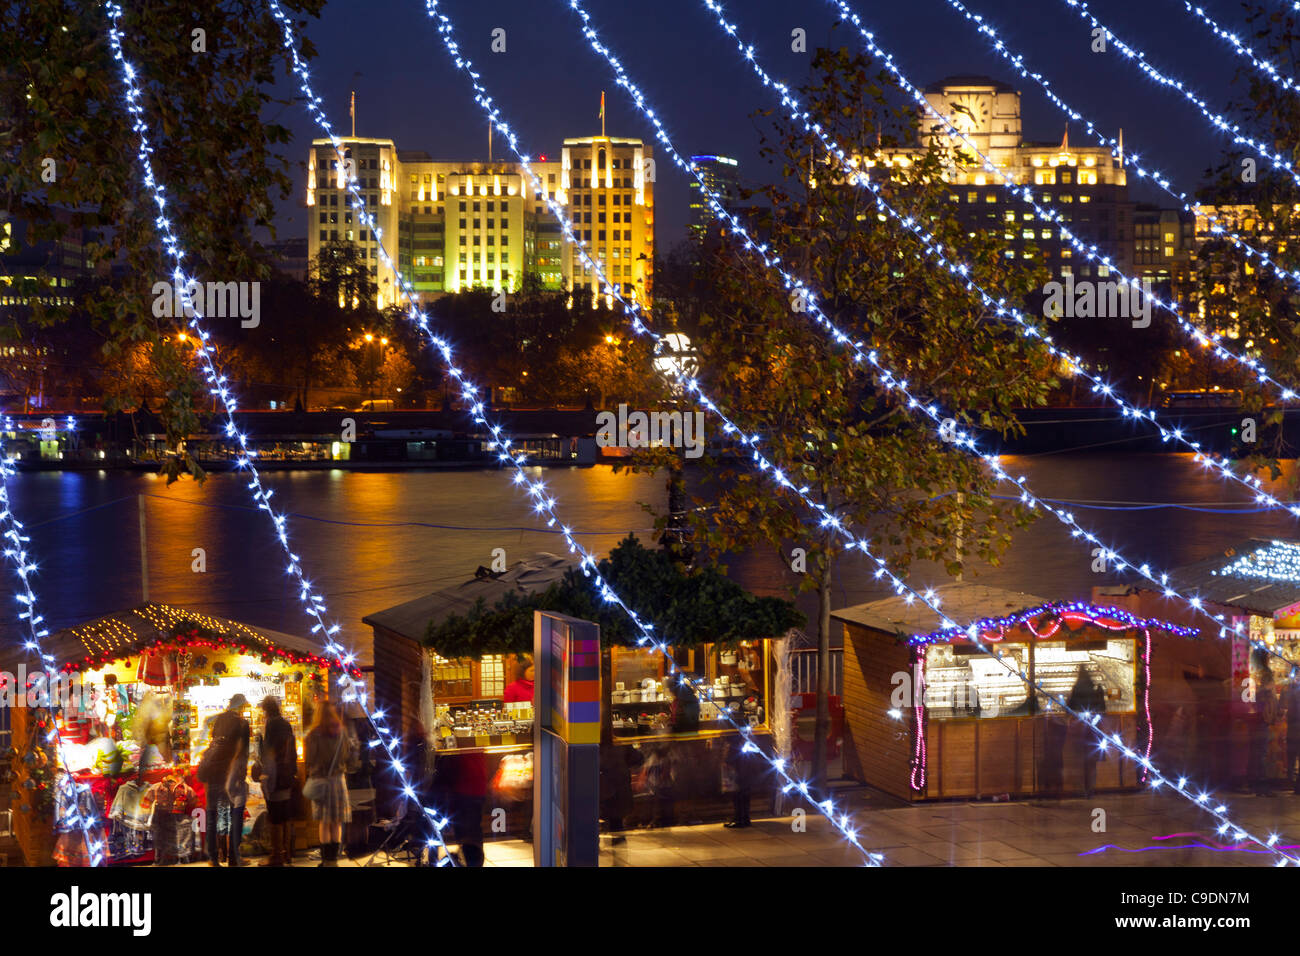 German Christmas Market Stalls on the South Bank, London at night, looking through lines of Xmas lights across to New Adelphi Stock Photo